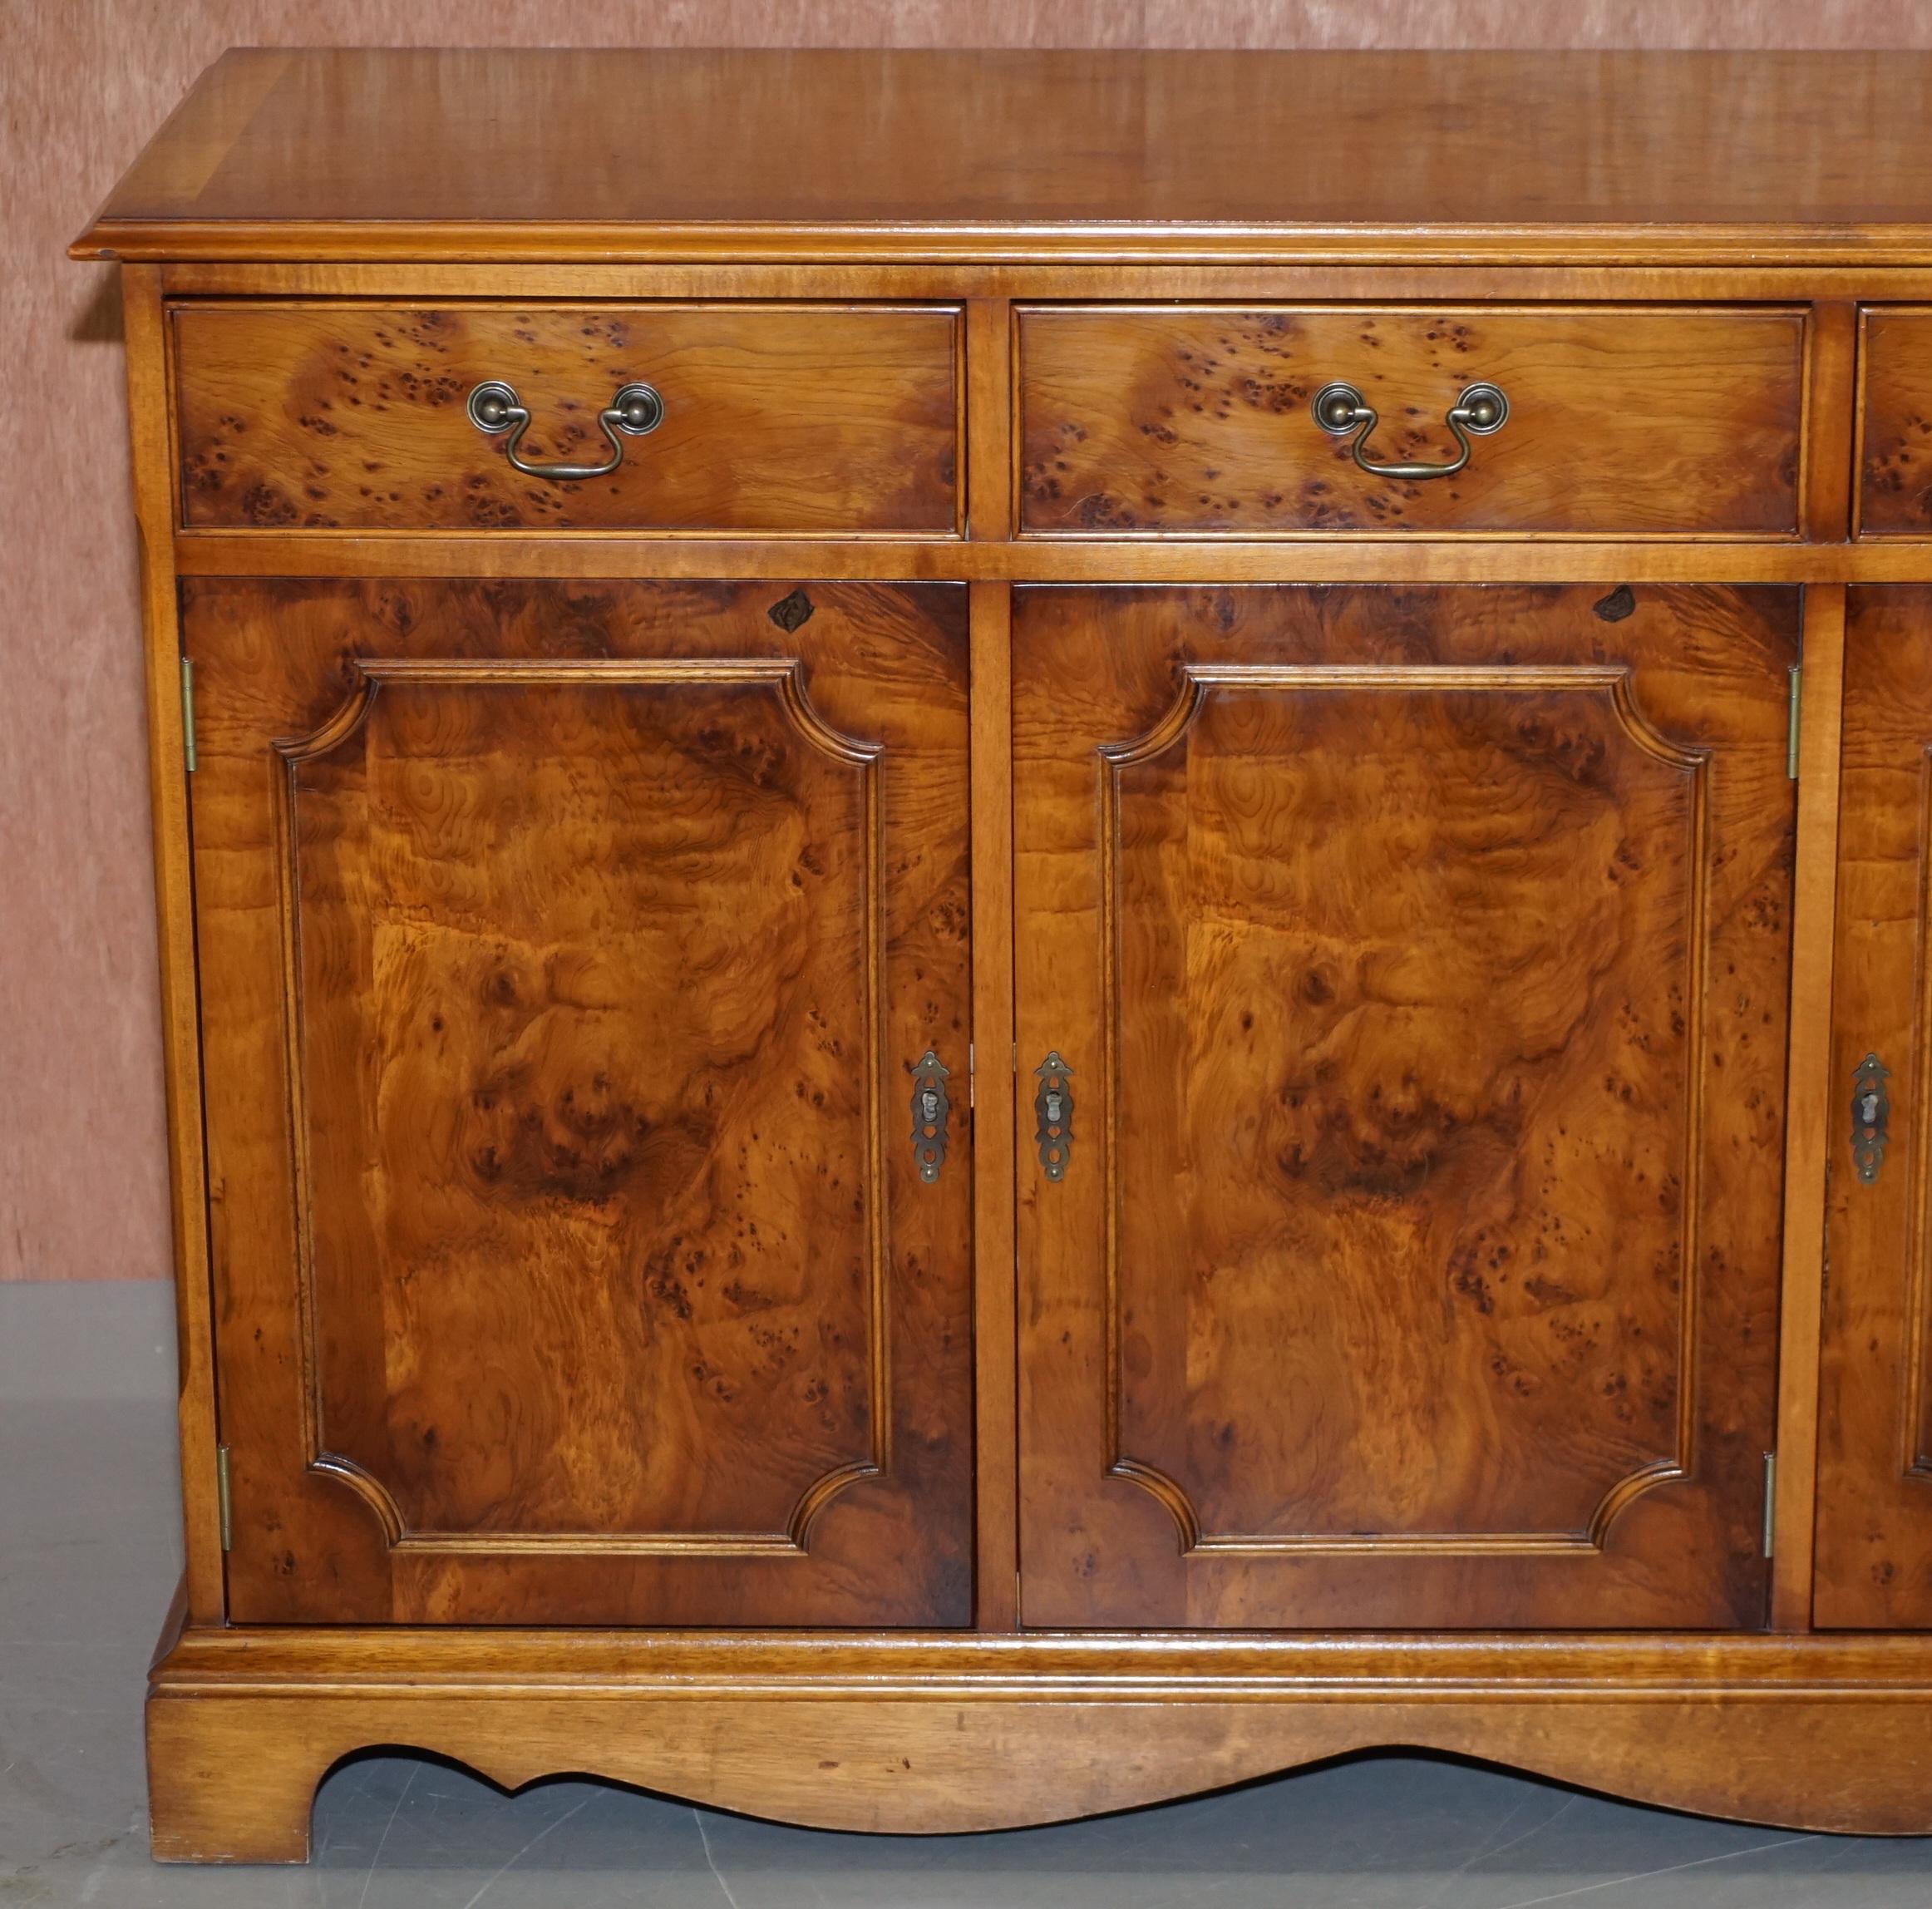 20th Century Made in England Craft Furniture Burr Yew Wood Triple Drawer Sideboard Cupboard For Sale